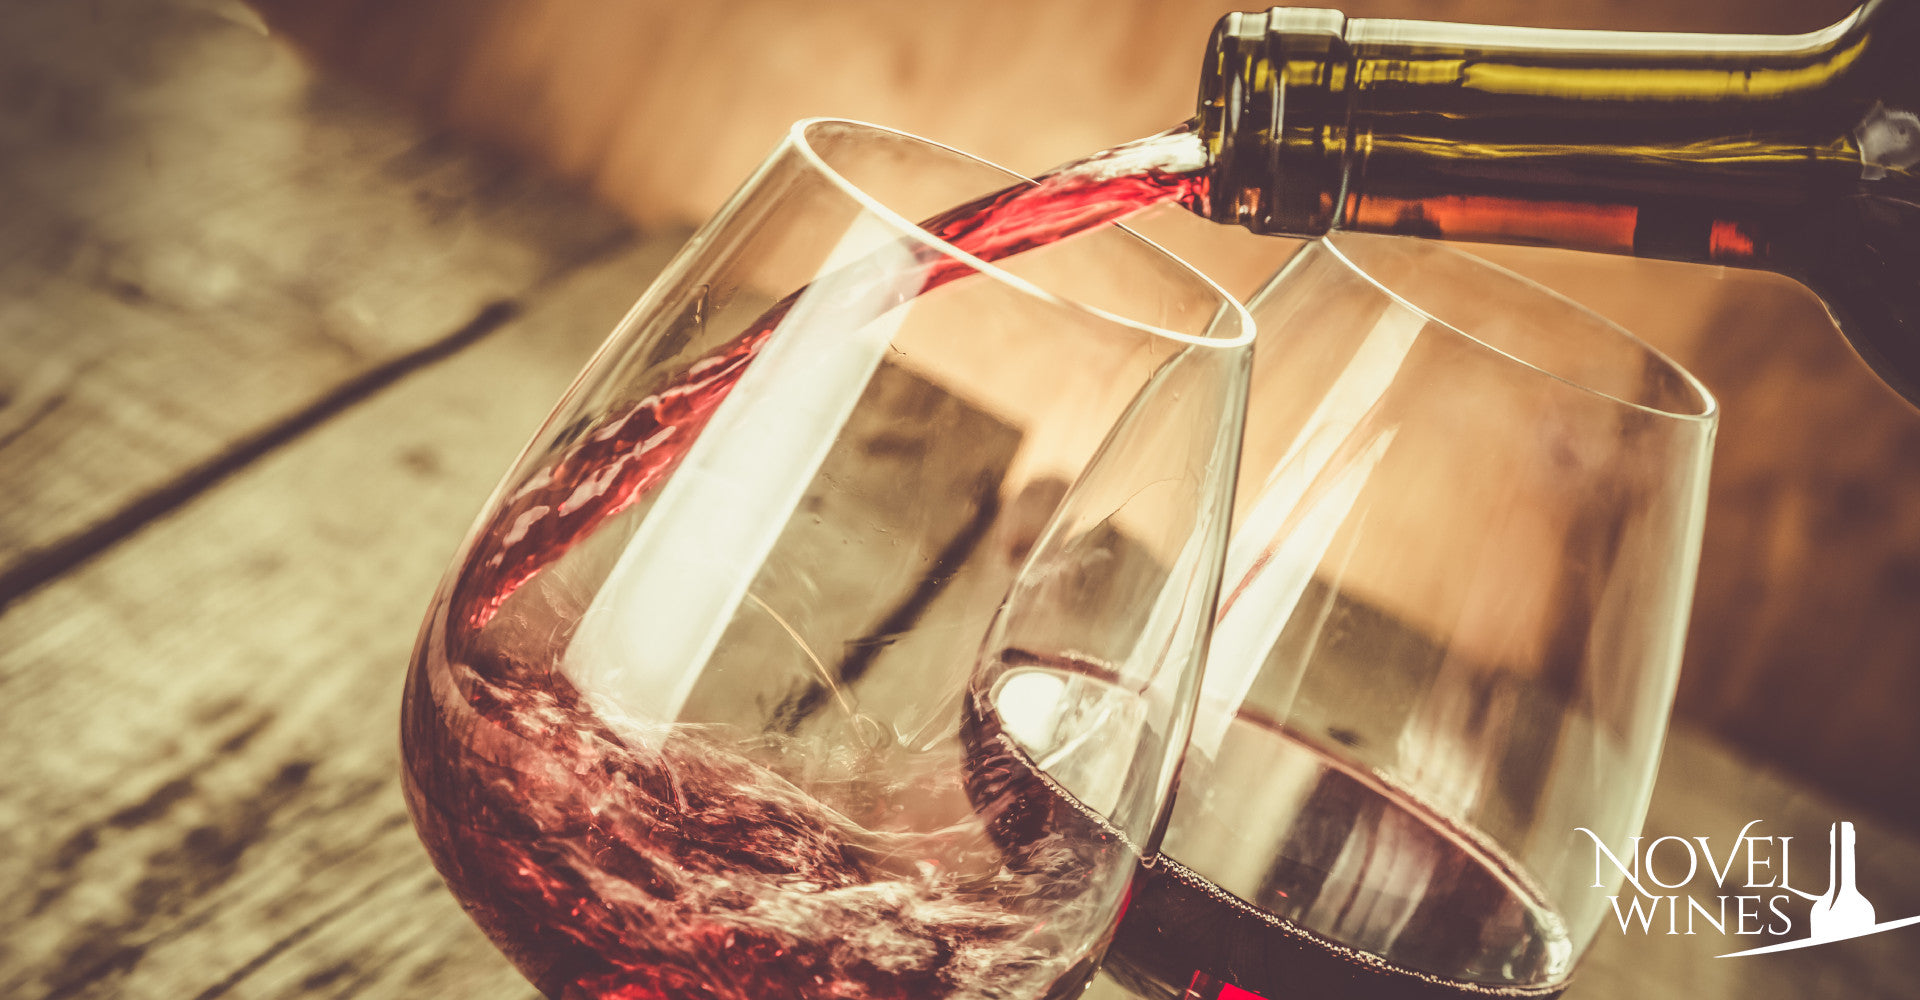 20 Red Wines to Drink in 2020 - The Novel Wines Red Wine Shortlist